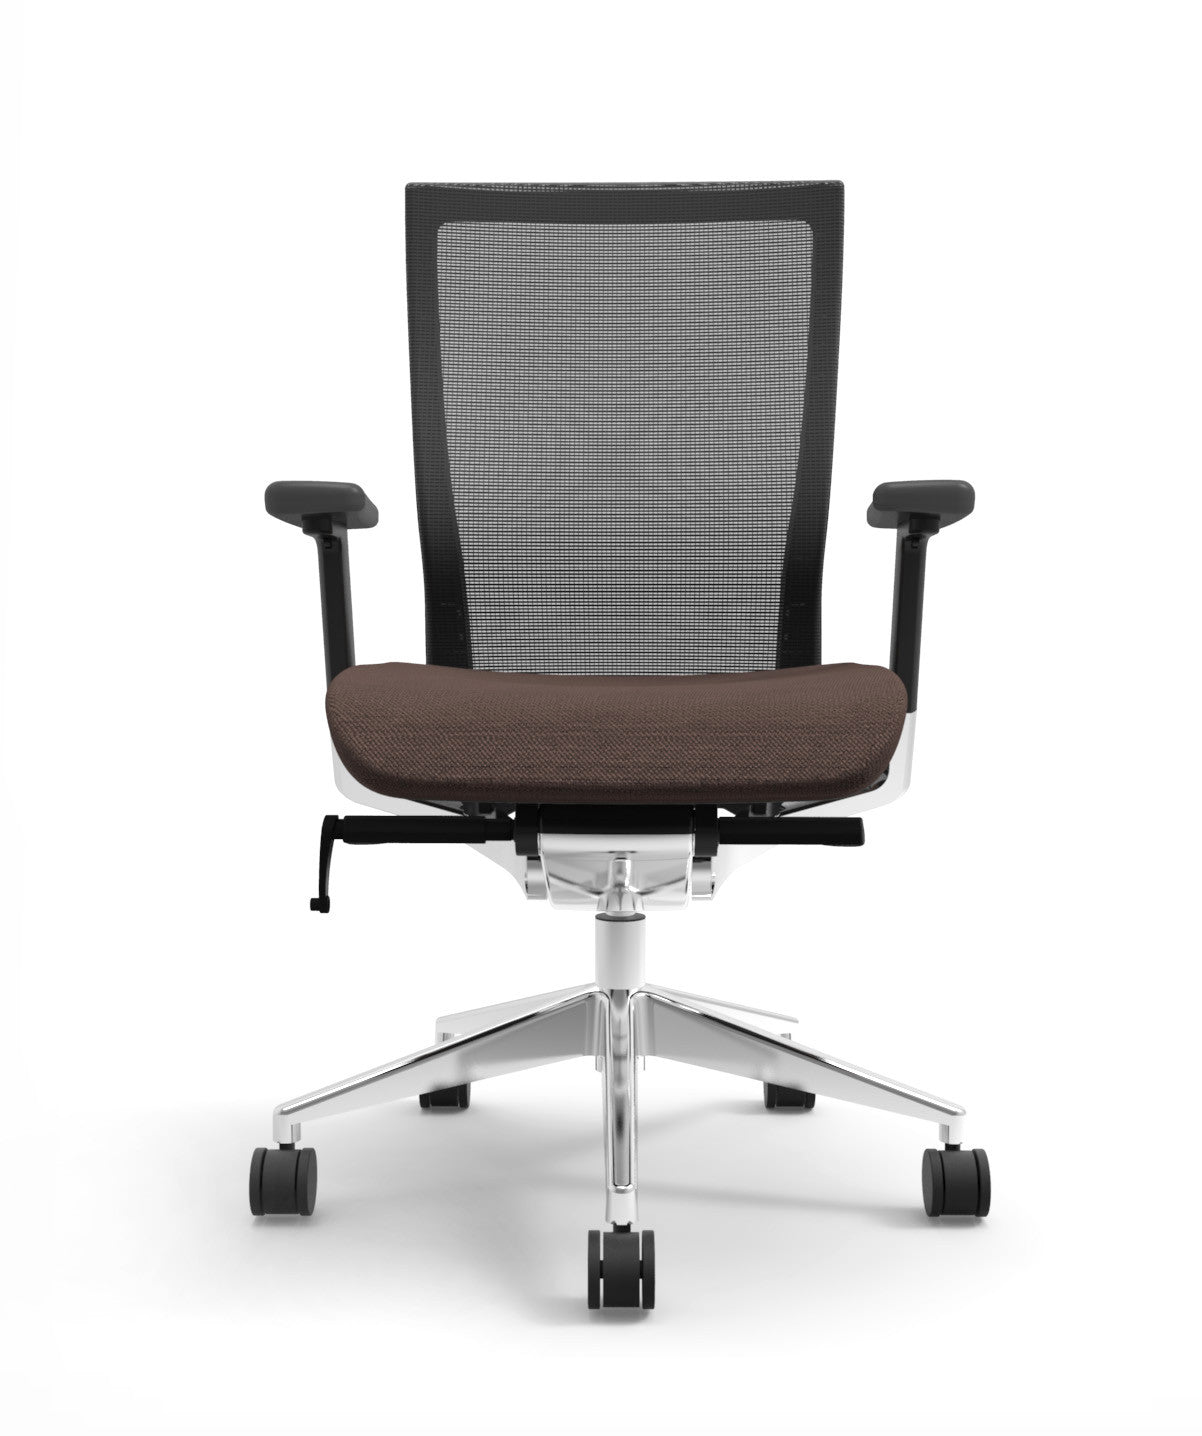 Blanco Office Chair with Terra Seat Option